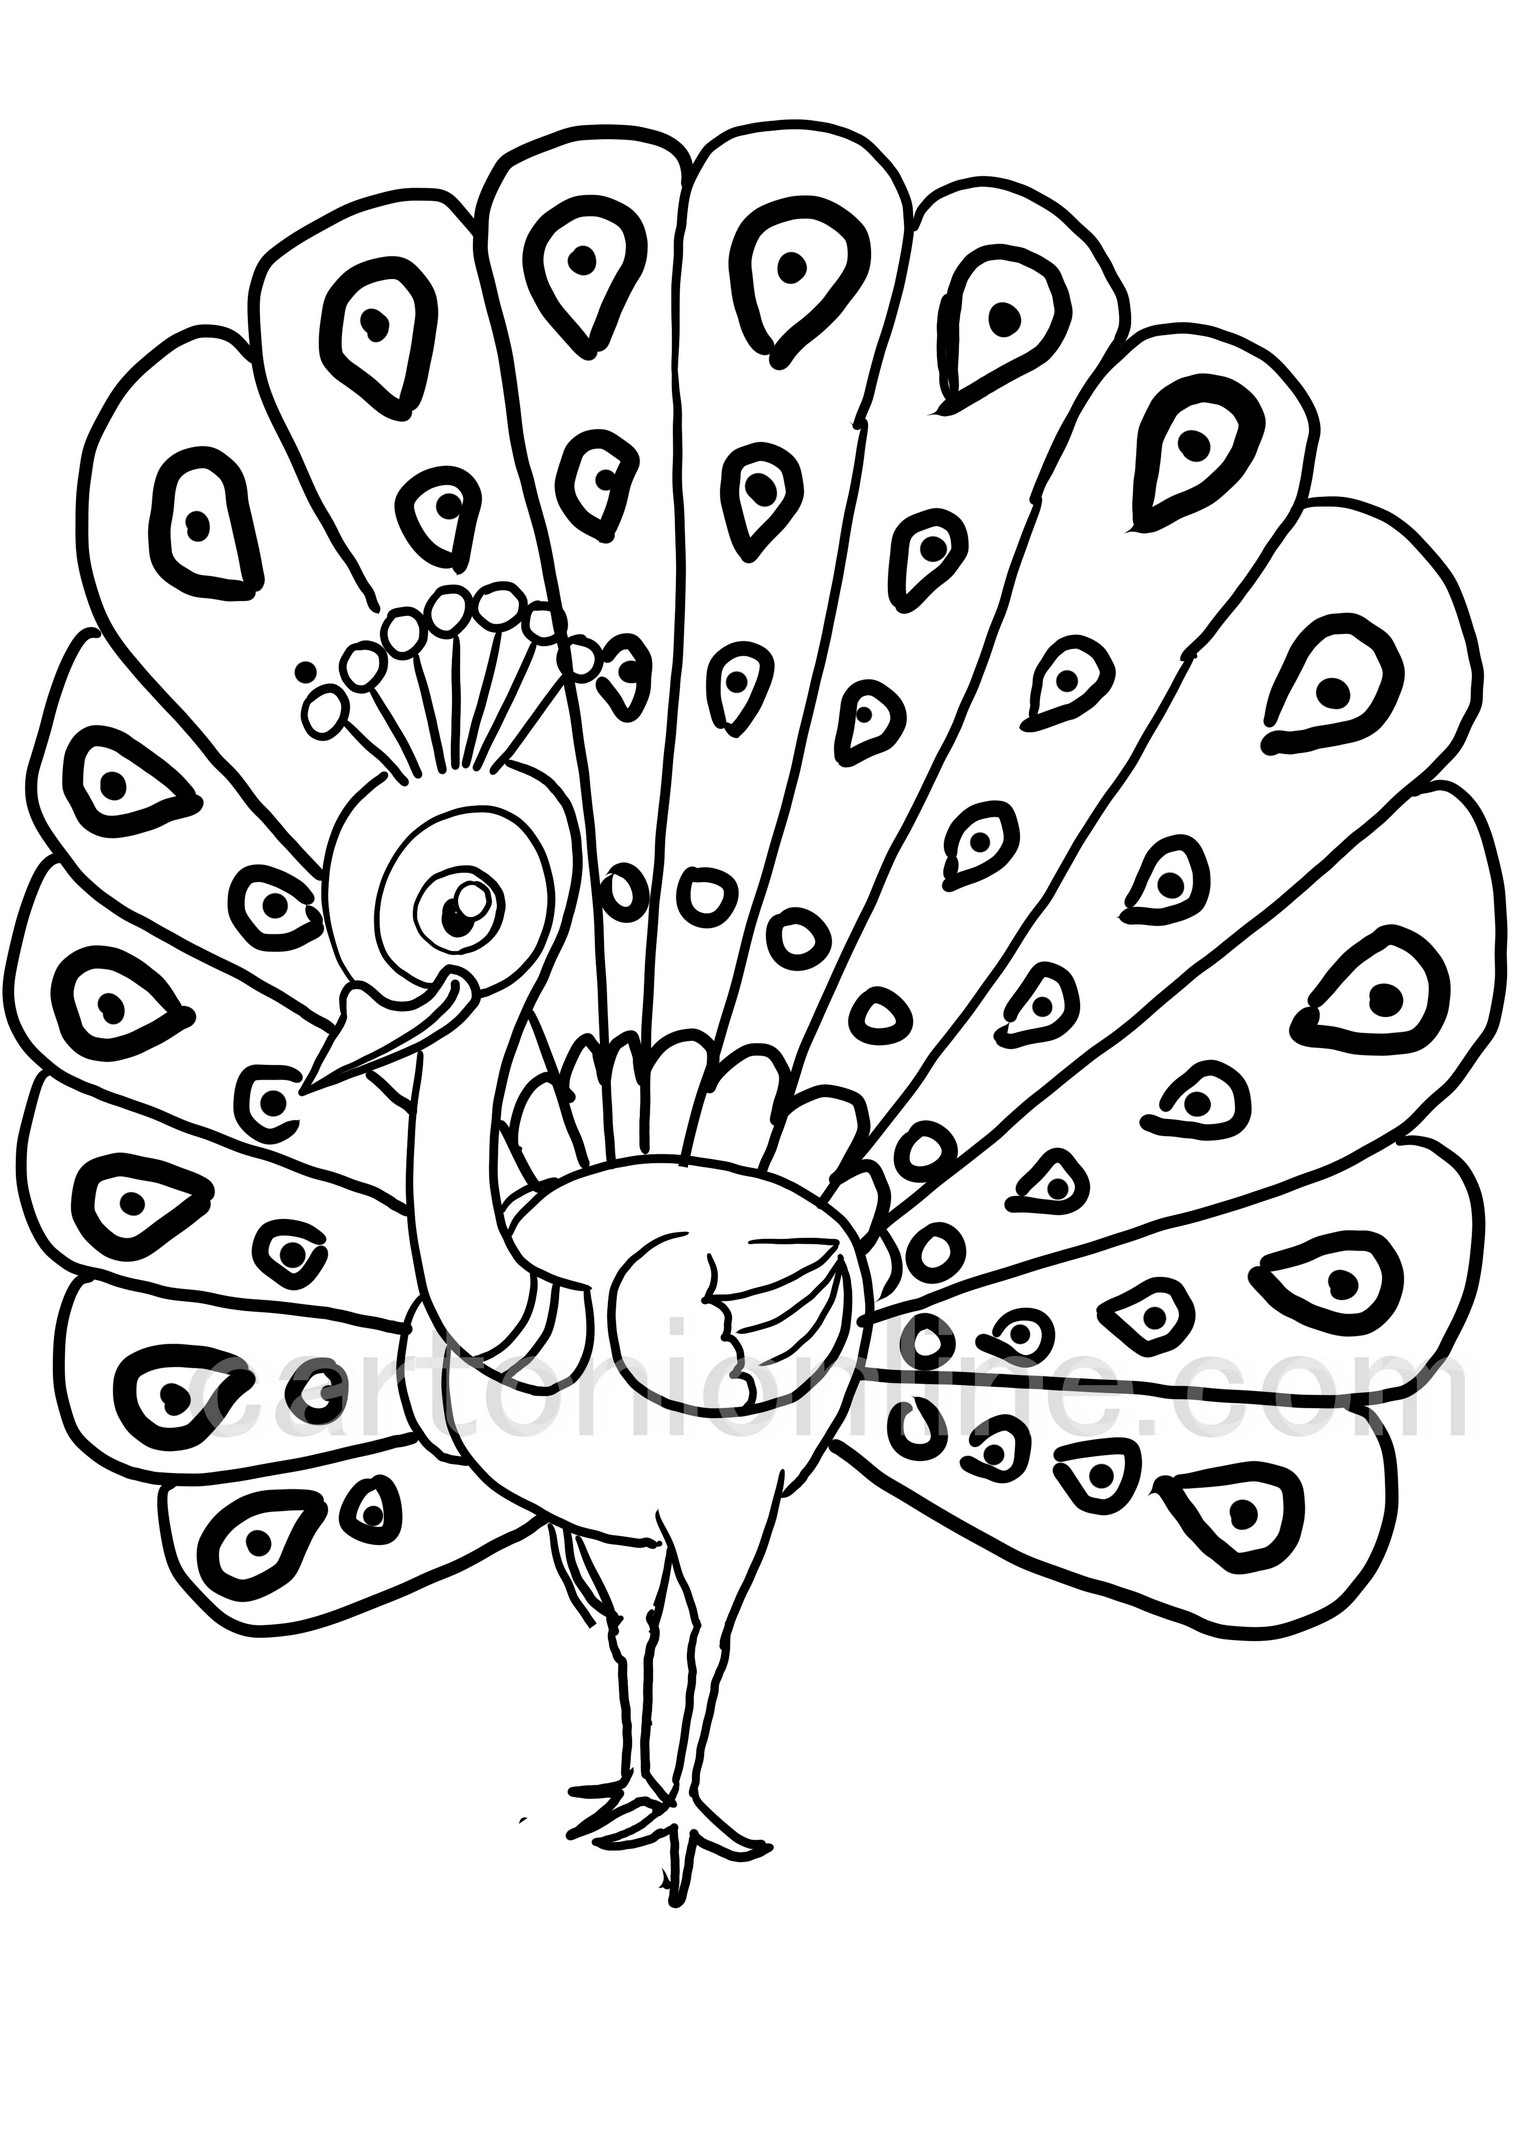 Cartoon style peacock coloring page